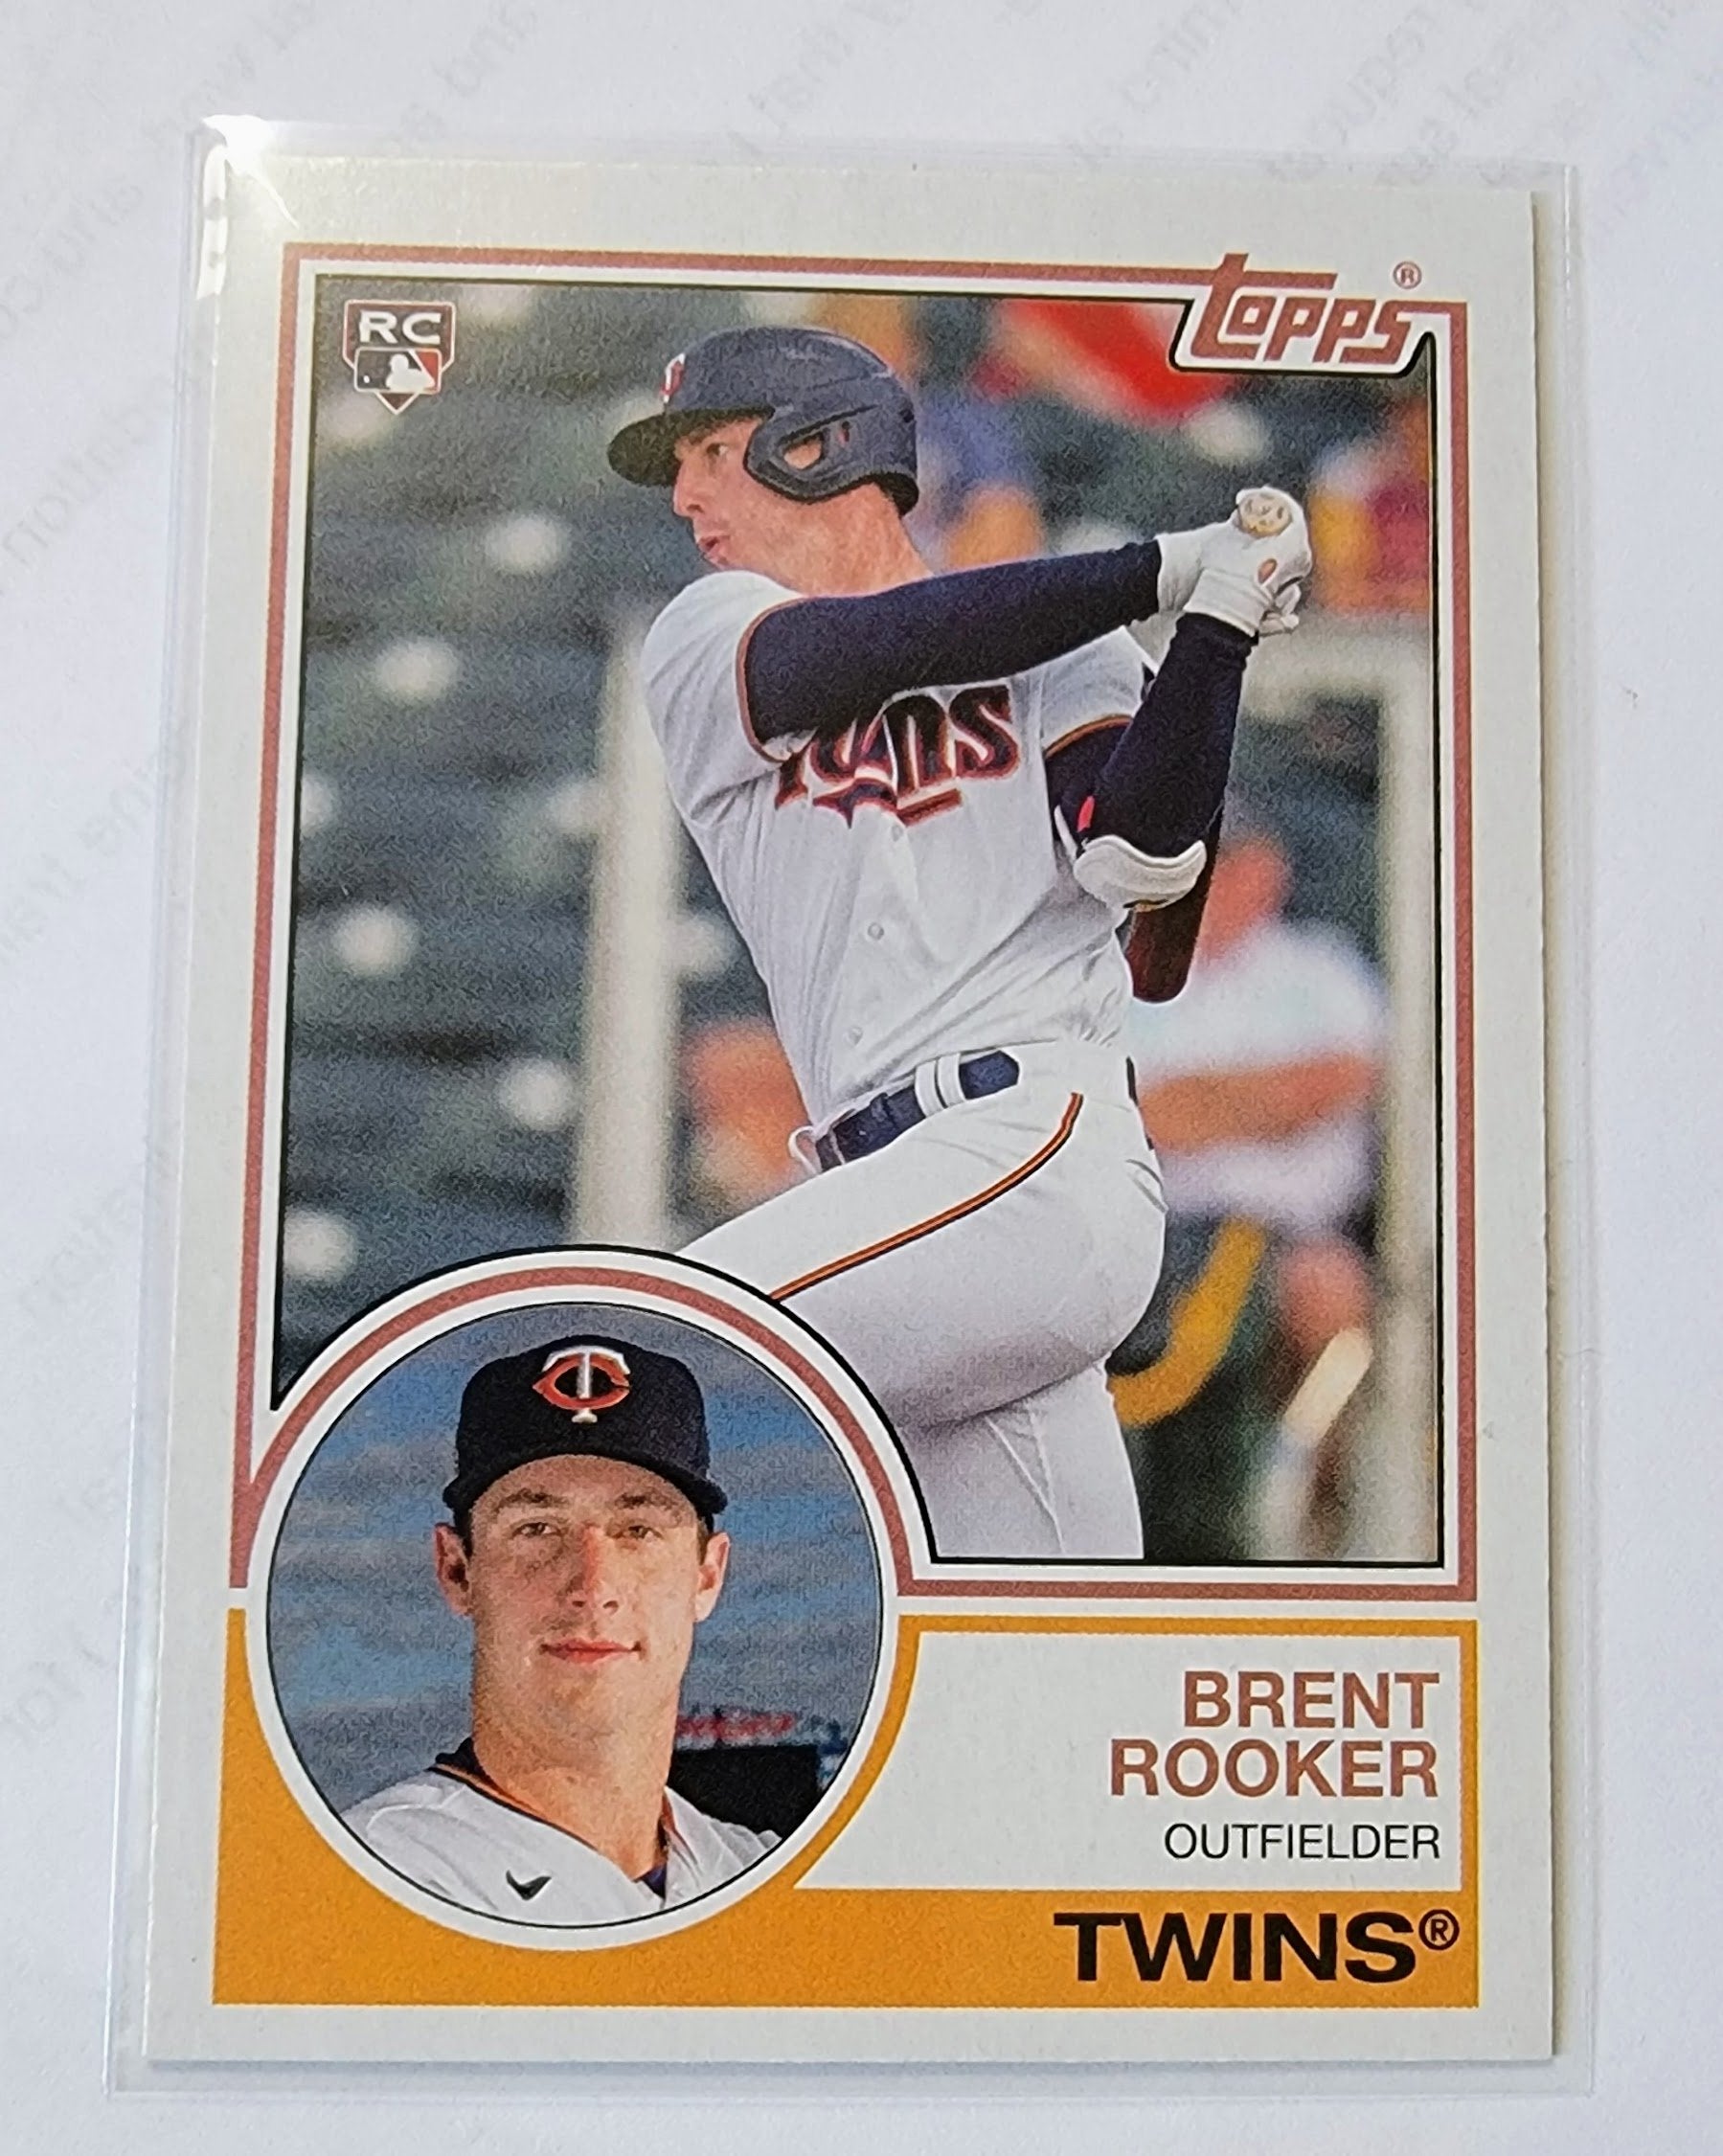 2021 Topps Archives Brent Booker 1983 Baseball Trading Card SMCB1 simple Xclusive Collectibles   